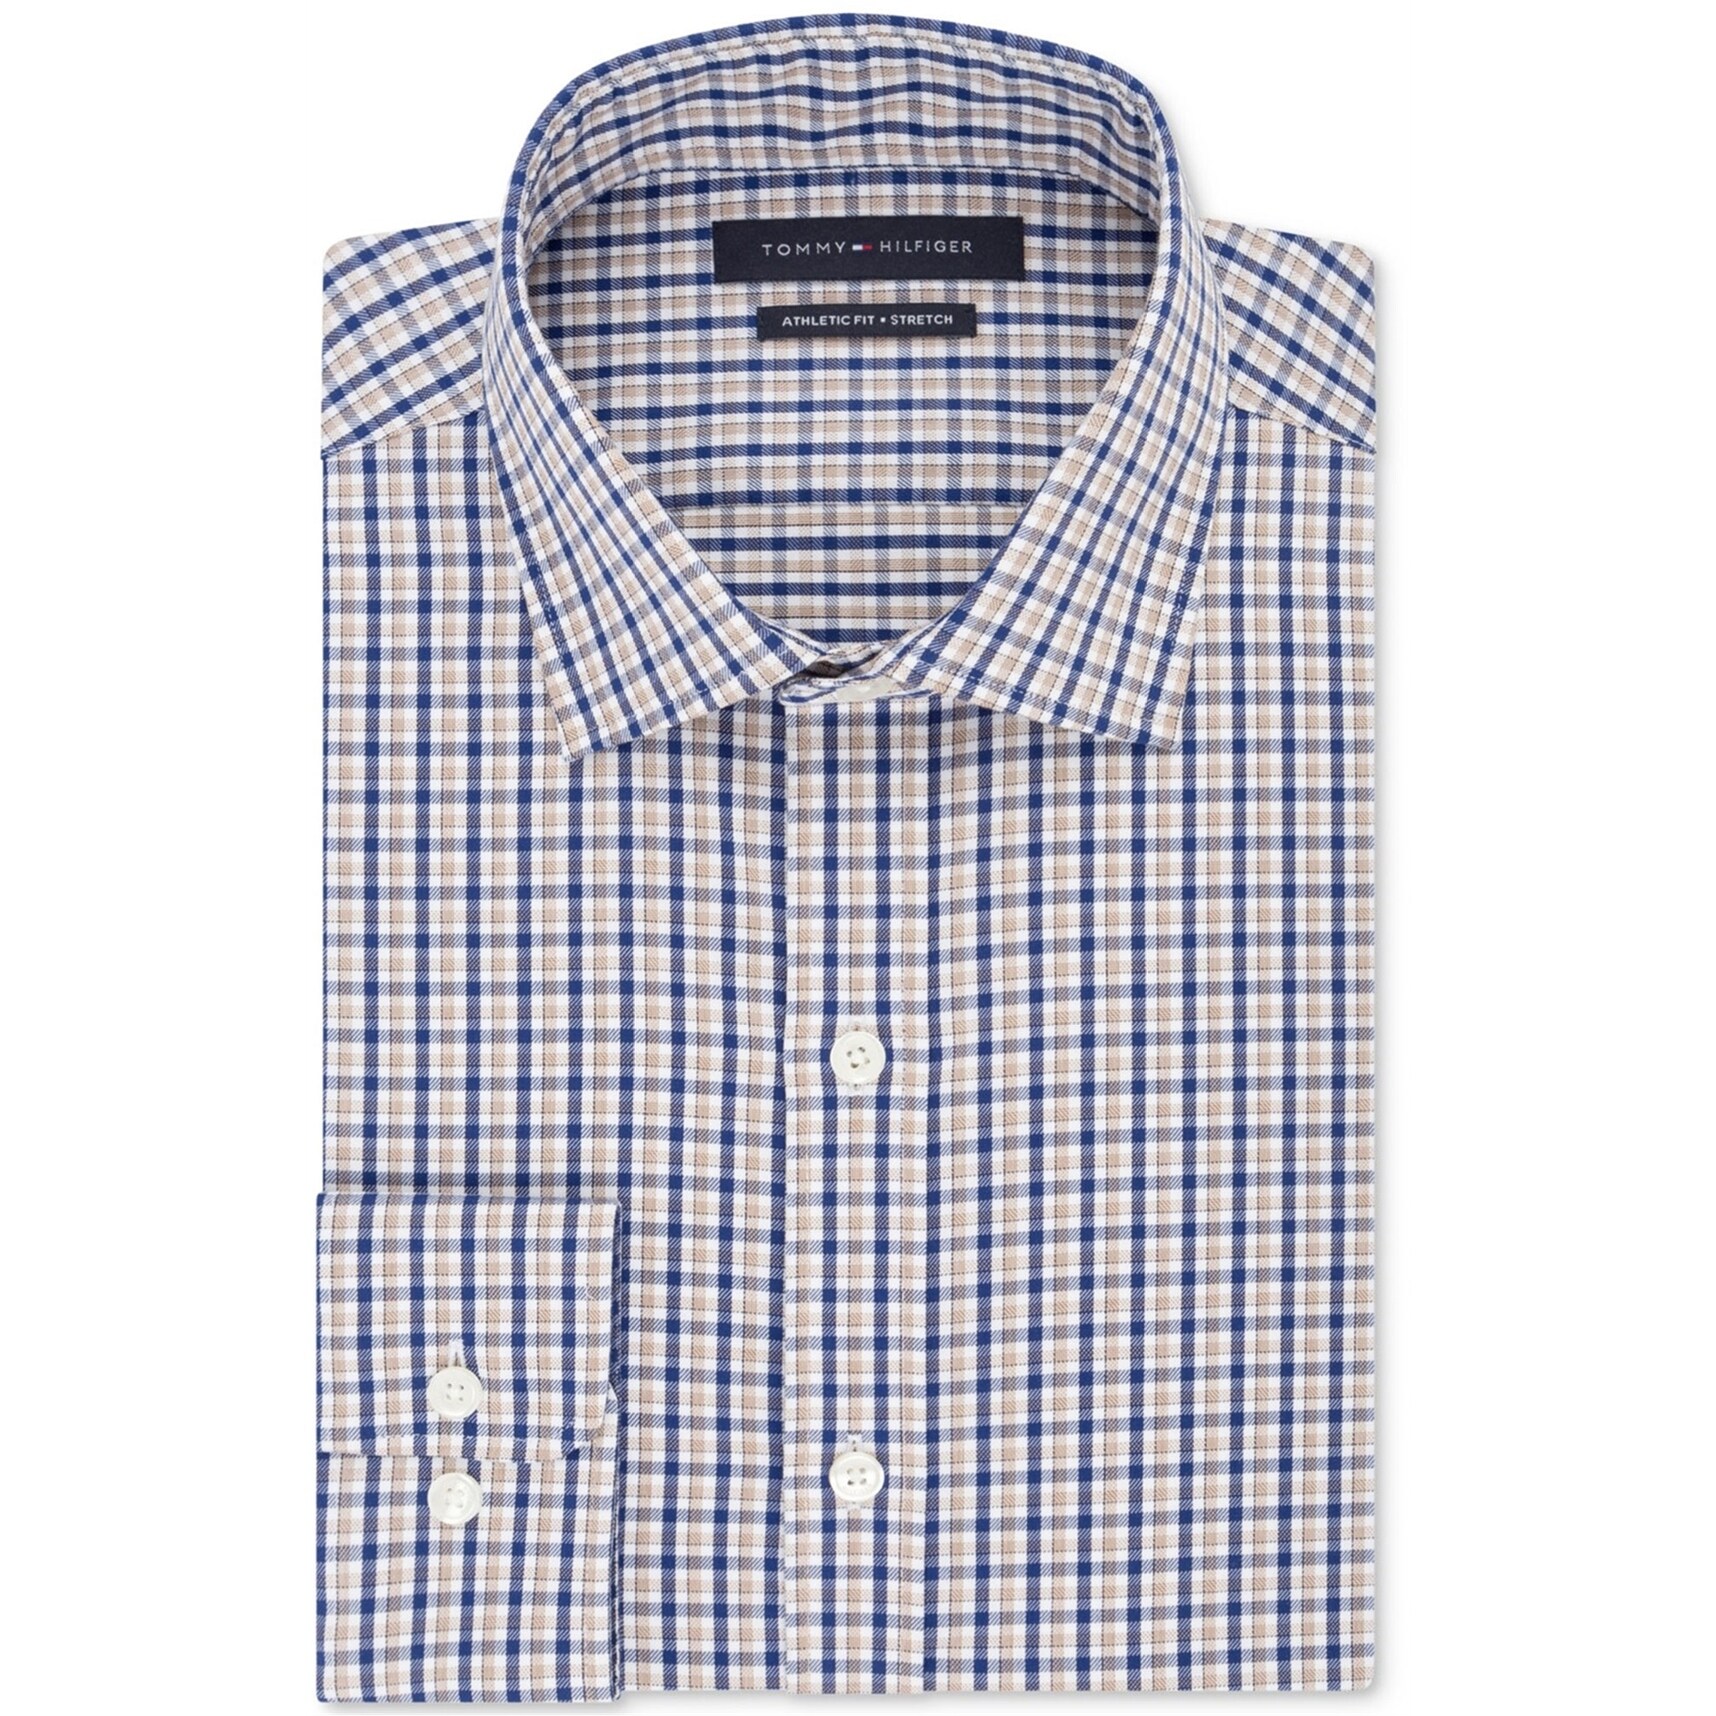 athletic button up shirts